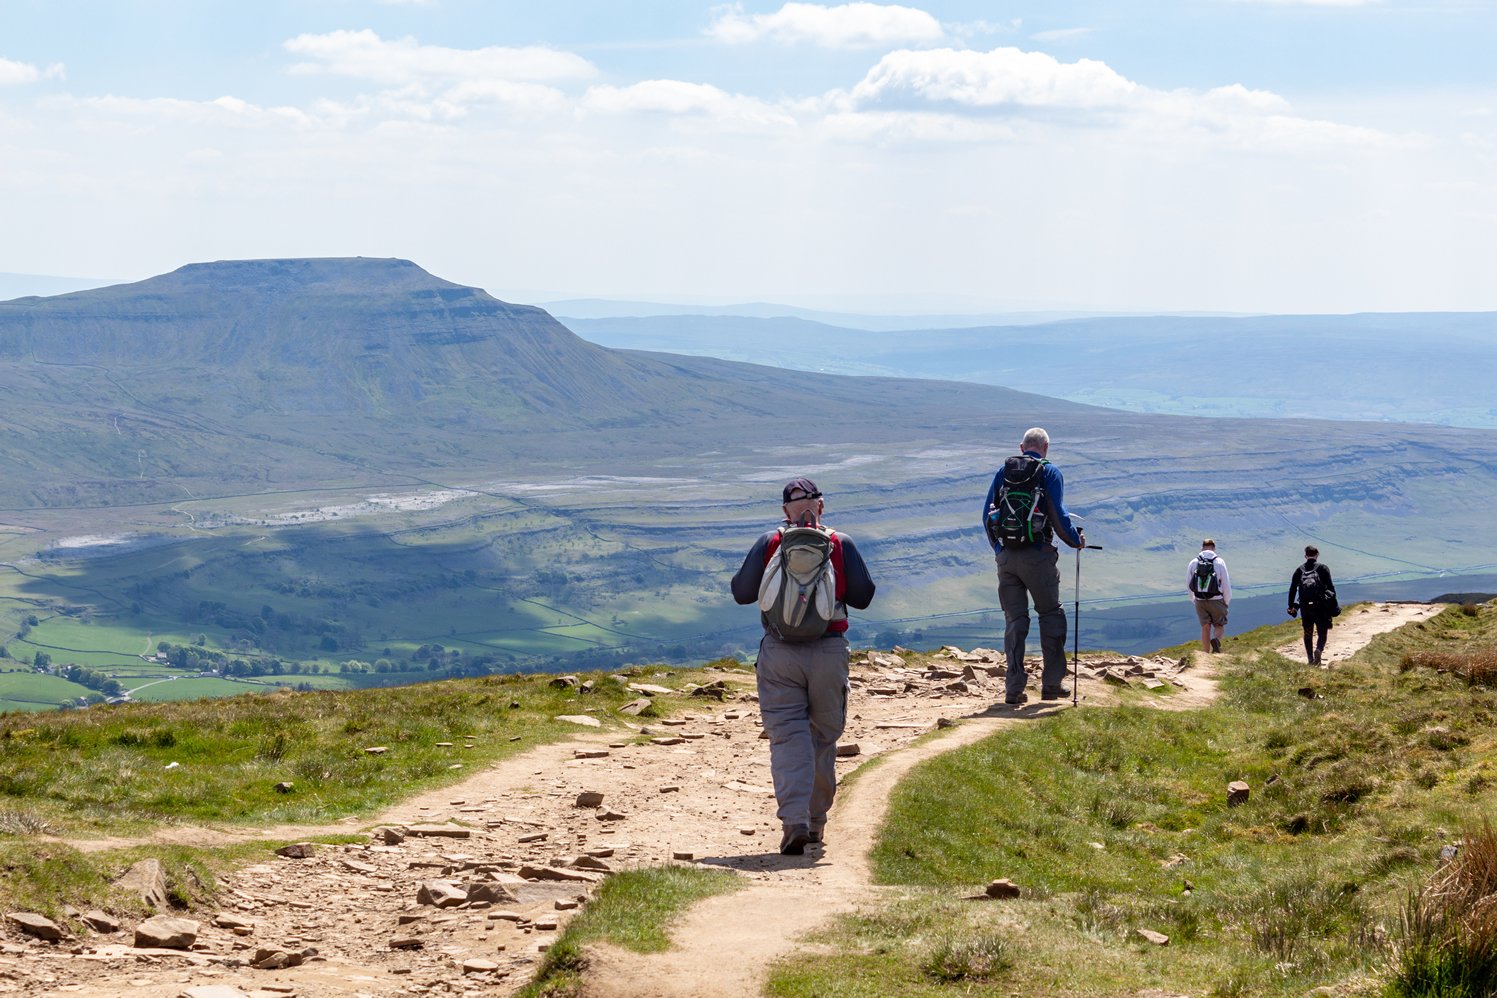 Image name walkers descending whernside view of ingleborough sunny yorkshire the 10 image from the post Stride Out in Yorkshire: Celebrate National Walking Day in Yorkshire.com.